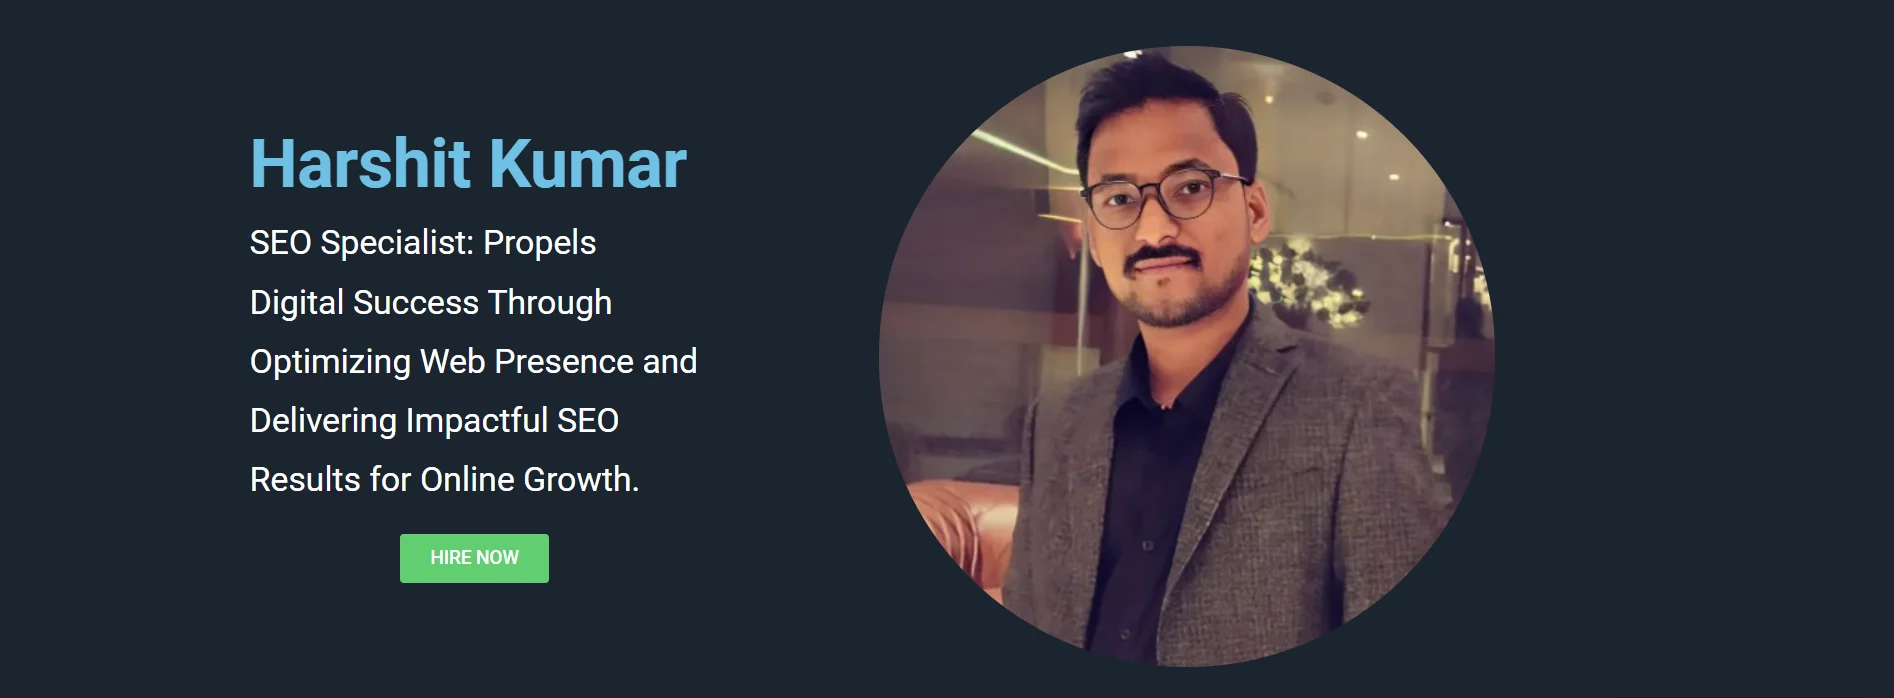 SEO: On-Page and Off-Page Strategies with Harshit Kumar